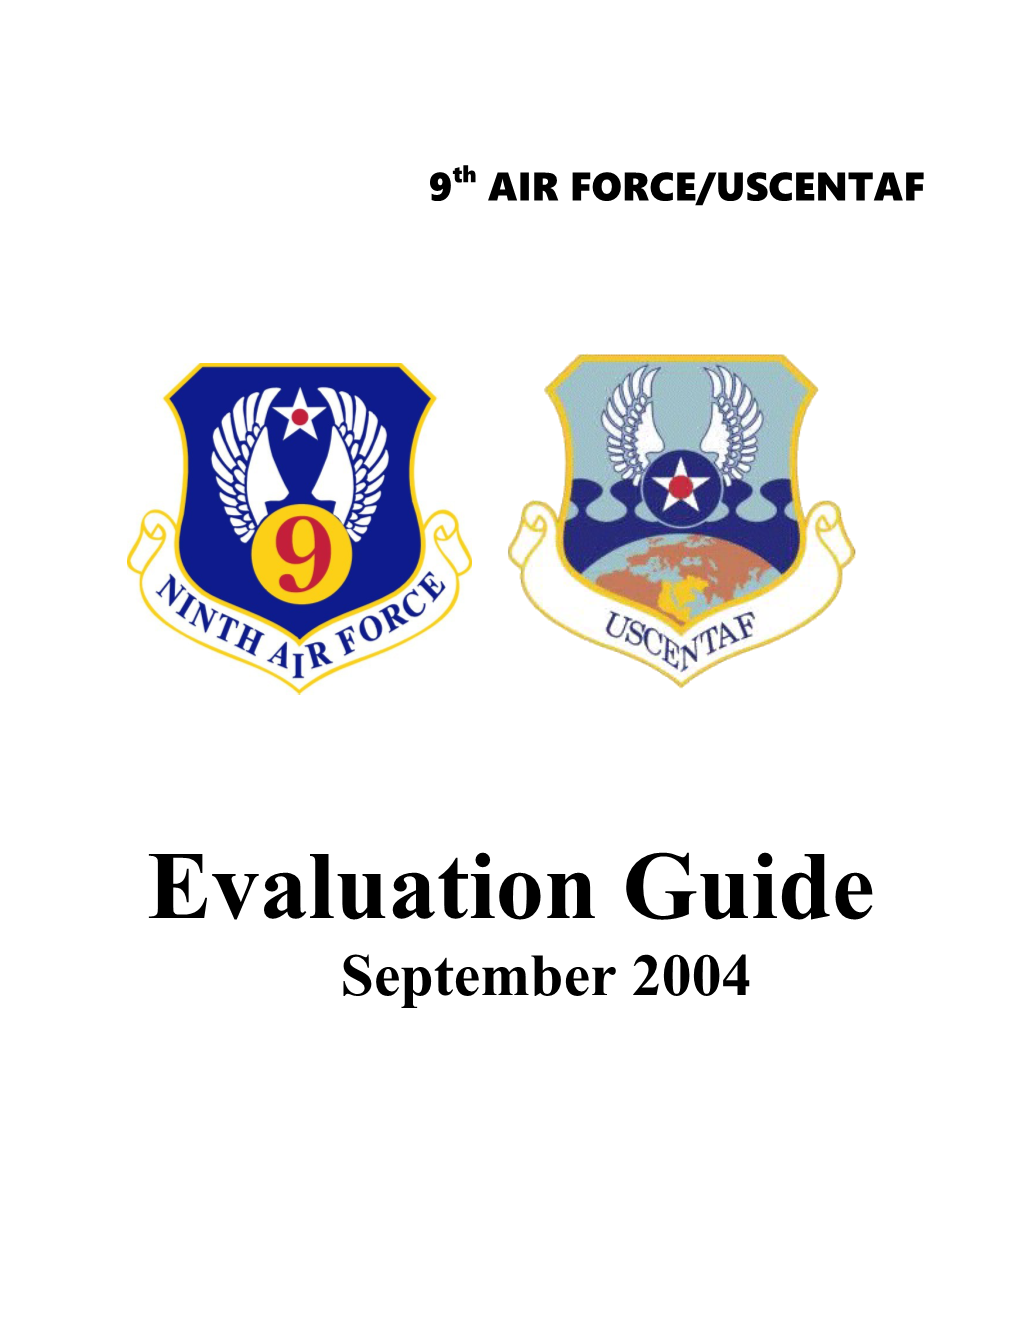 9Th AIR FORCE/USCENTAF Evaluation Guide